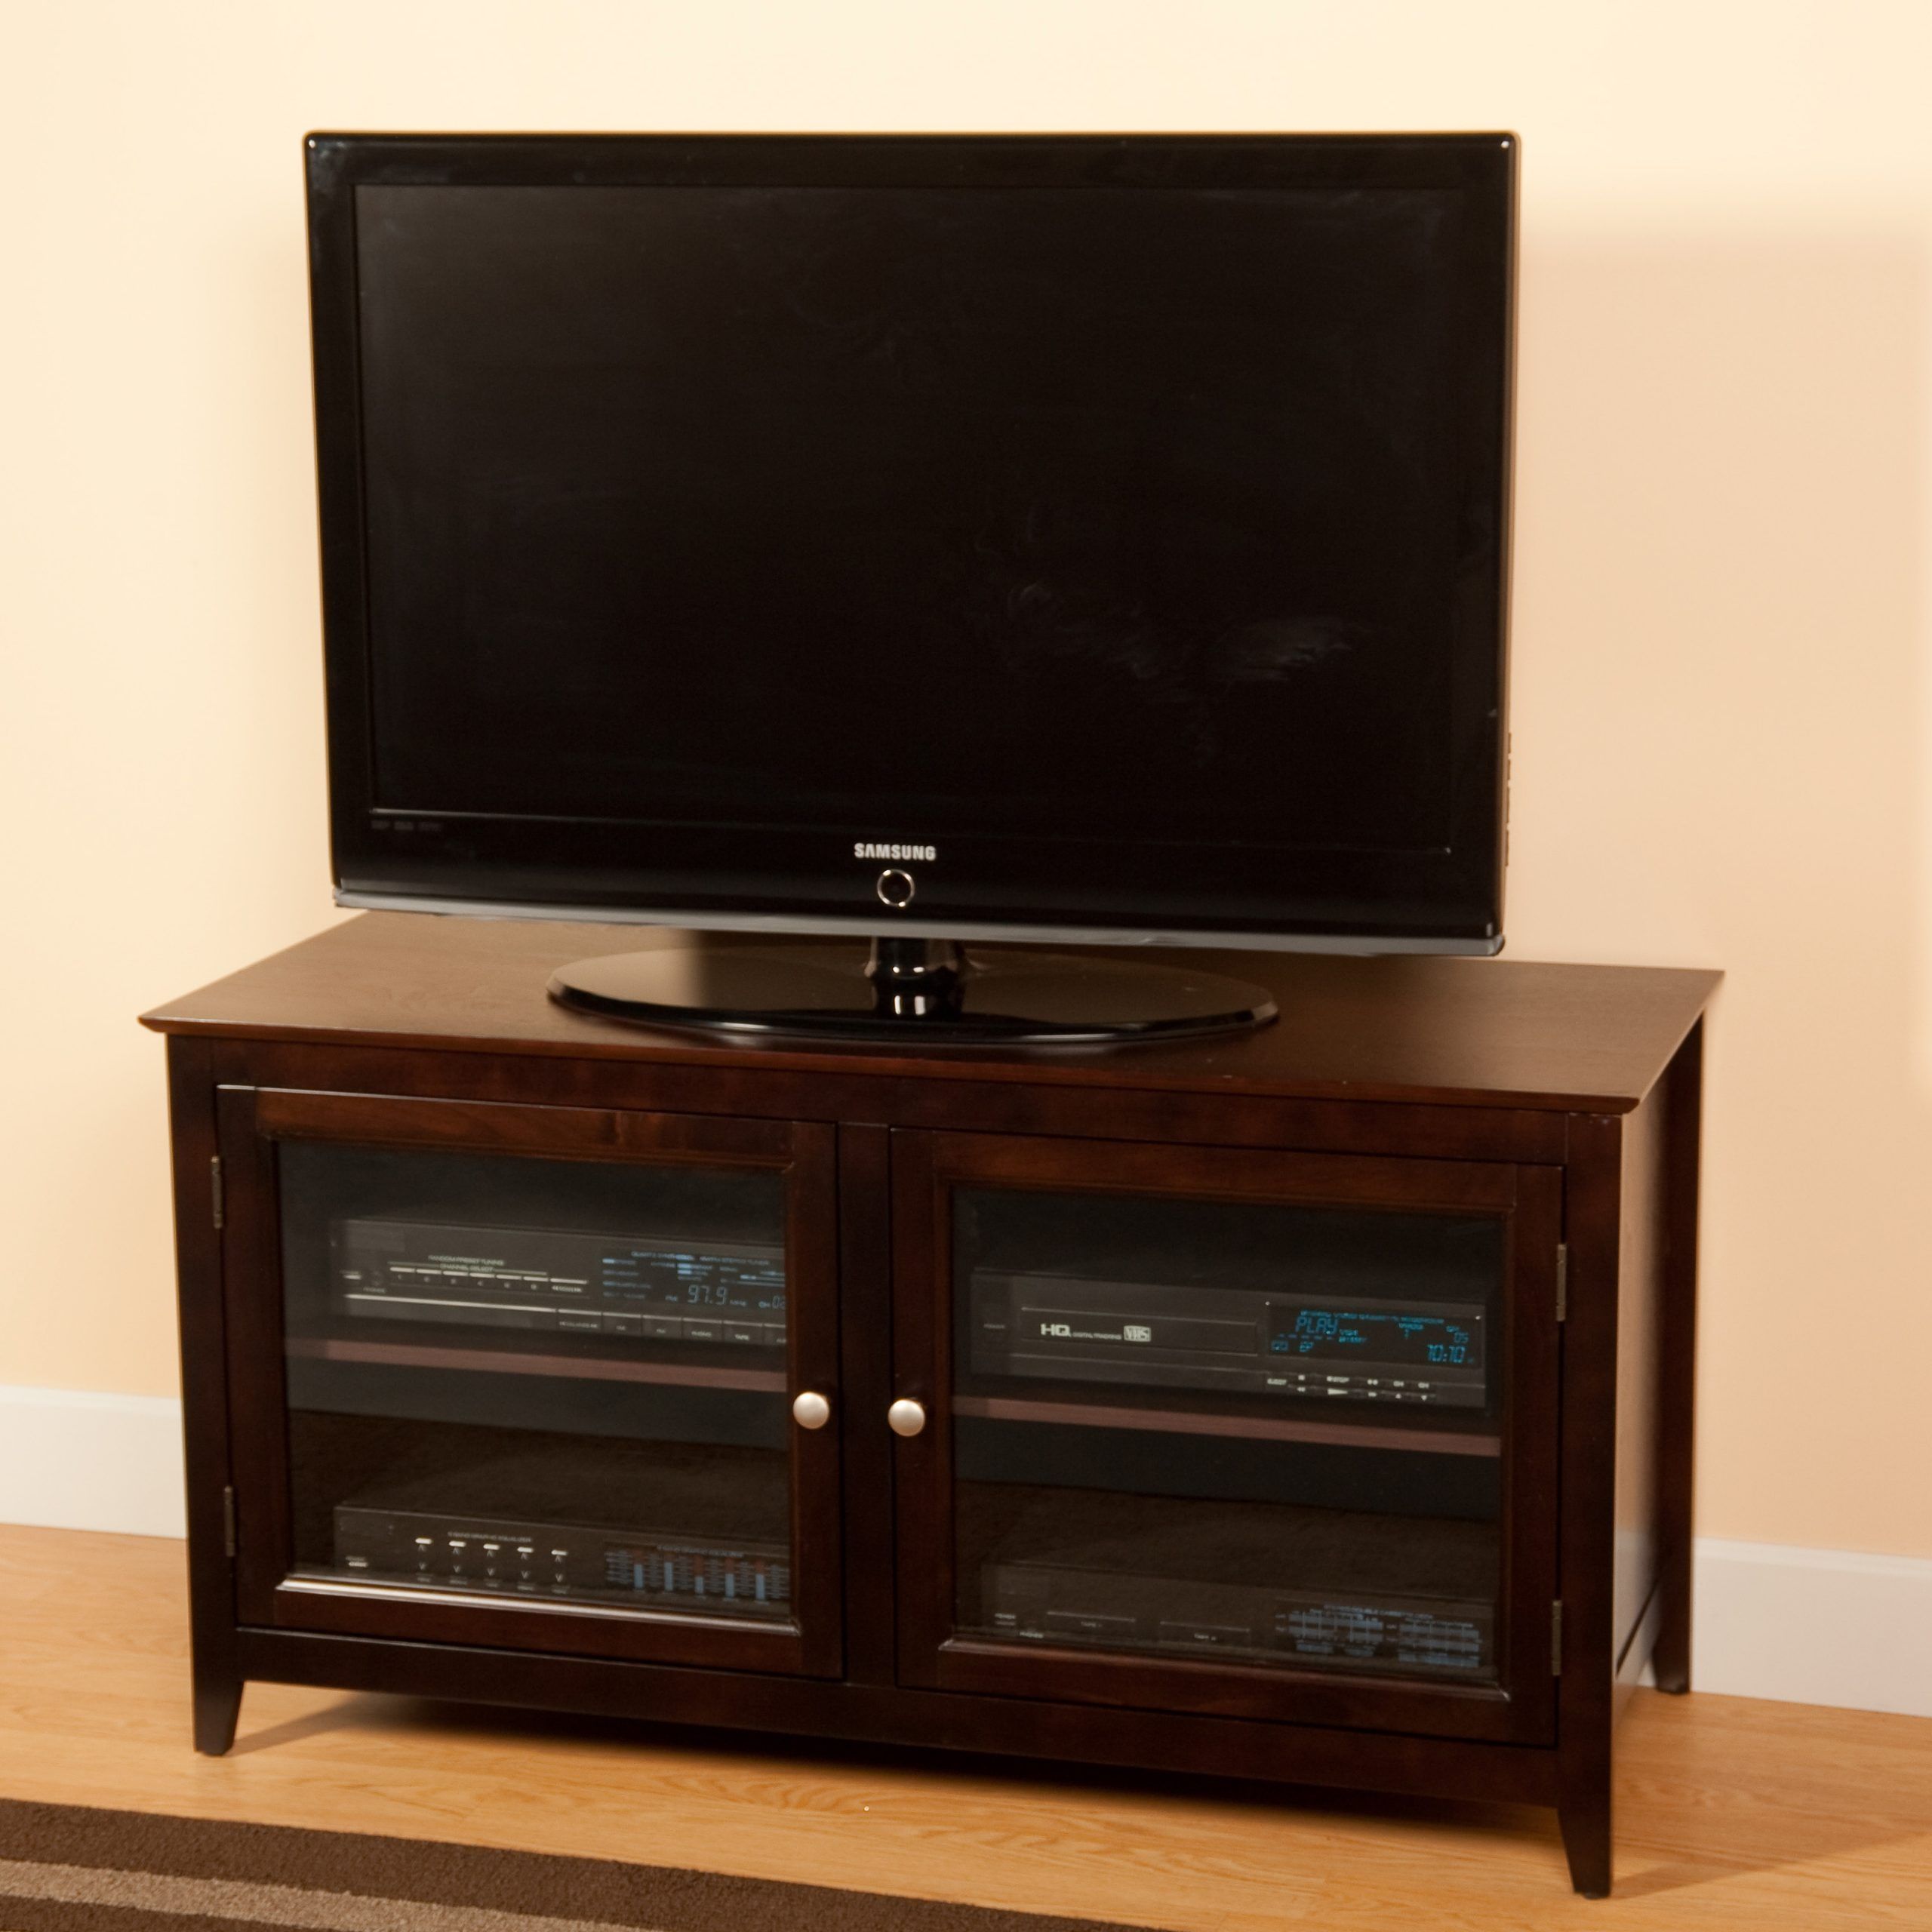 Premier 48 Inch Tv Stand At Hayneedle With Antea Tv Stands For Tvs Up To 48" (View 8 of 15)